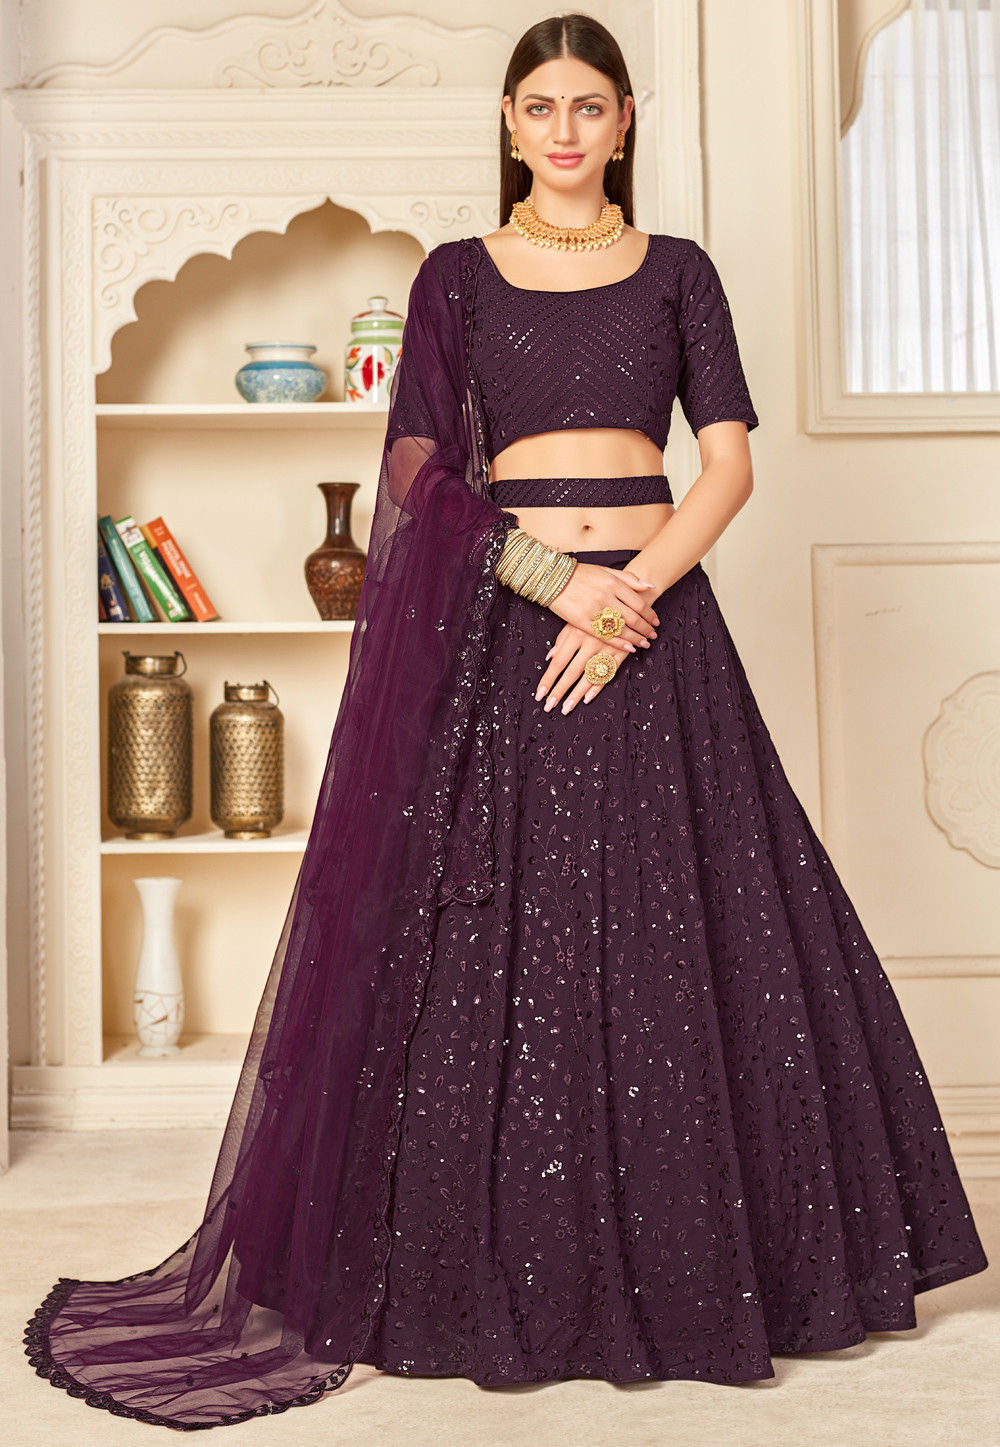 WINE MAGENTA LEHENGA SET WITH MULTI COLOURED THREADWORK AND “ABLA”  EMBROIDERY PAIRED WITH A SCALLOPED NECKLINE CLASSIC BLOUSE AND A MATCHING  DUPATTA WITH TASSELS AND SILVER EMBELLISHMENTS. - Seasons India